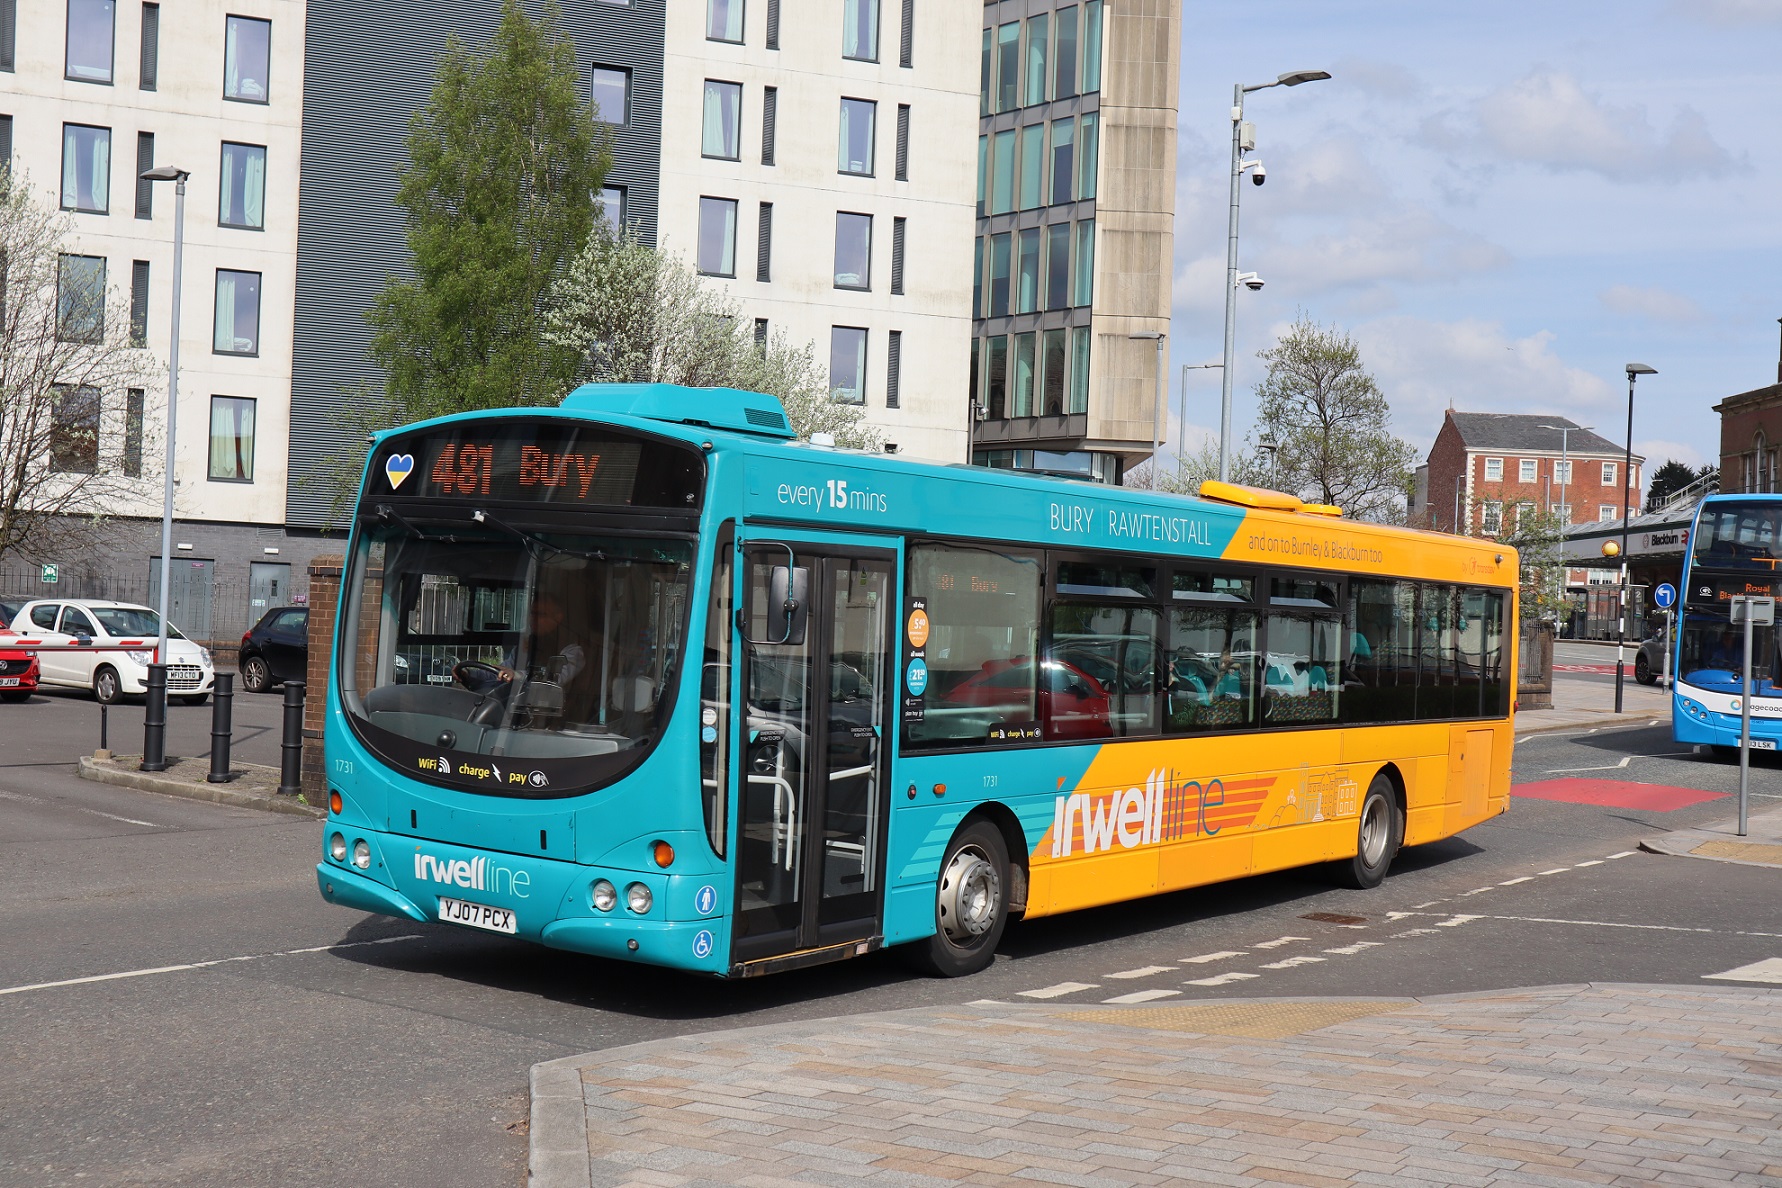 Spending cuts potential to impact bus service provision